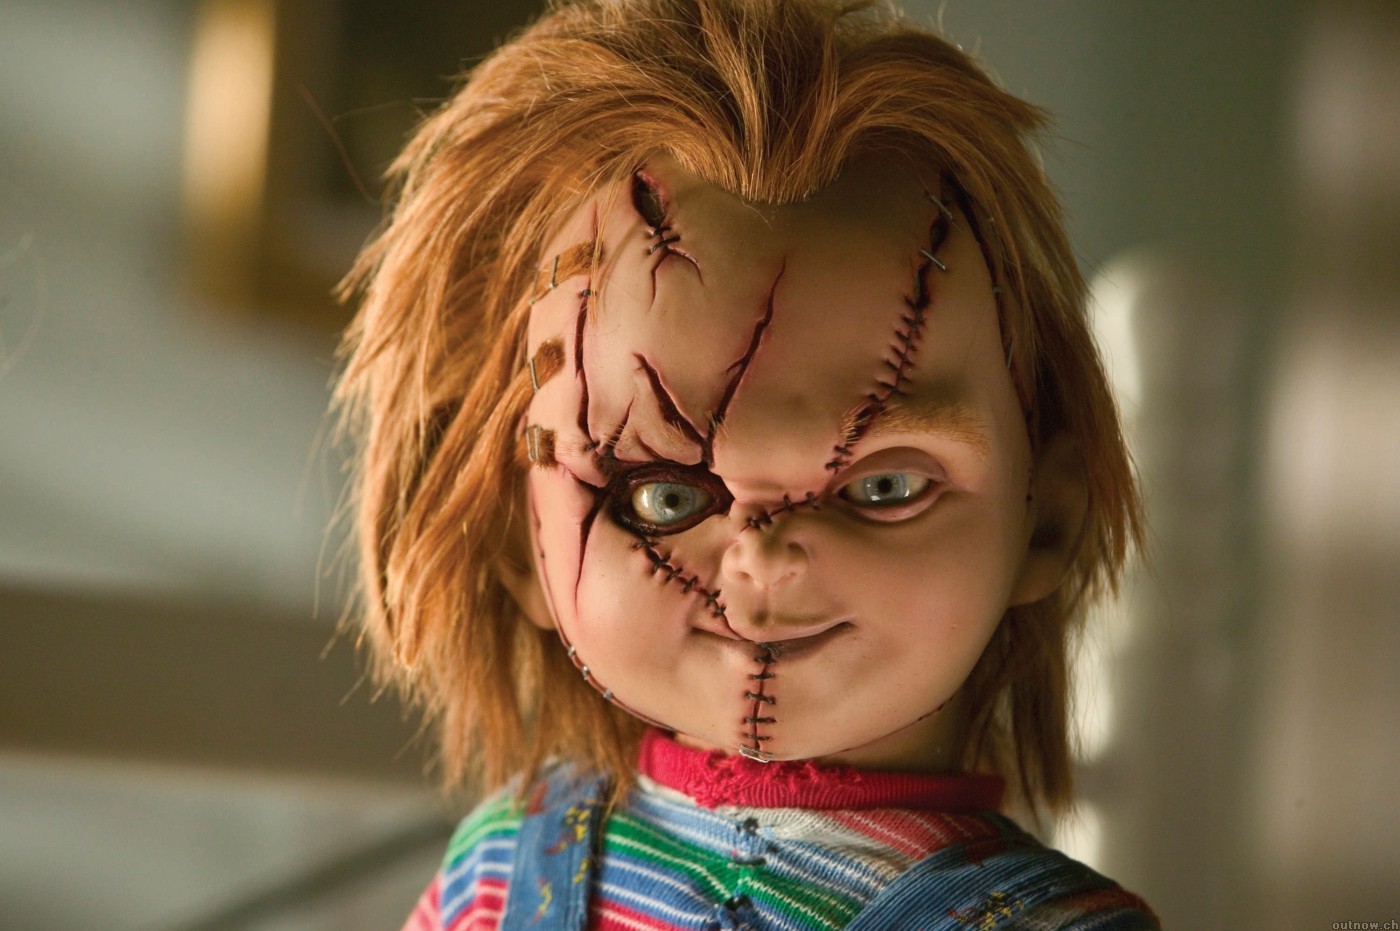 The One And Only Chucky Doll.